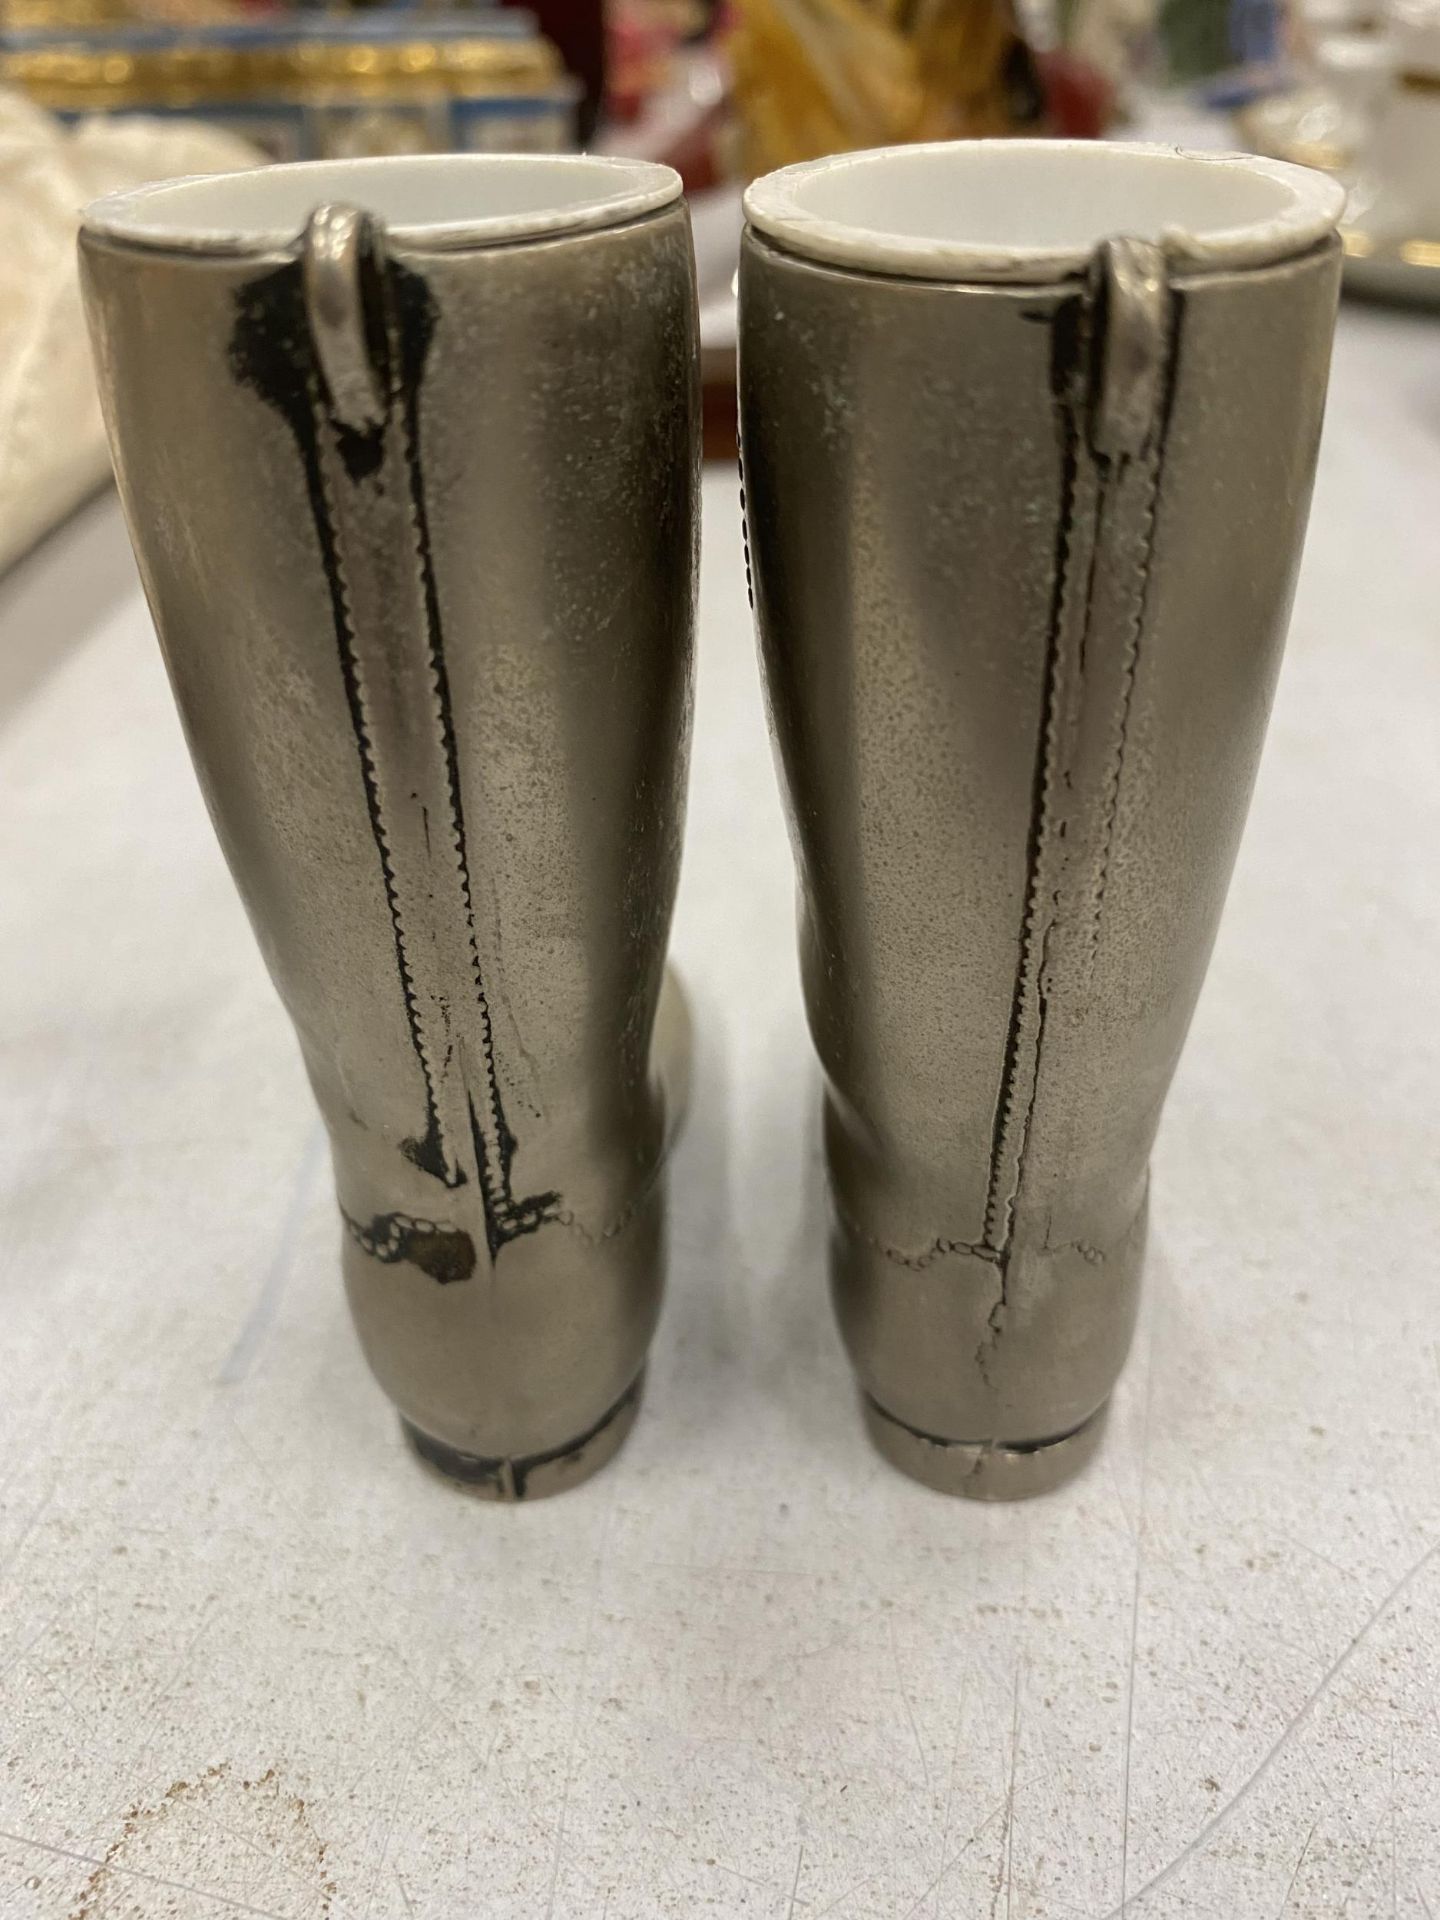 A PAIR OF SILVER PLATED WELLY BOOTS, ONE WEIGHING 1 oz, THE OTHER 1.5 oz, HEIGHT 9CM - Image 2 of 3